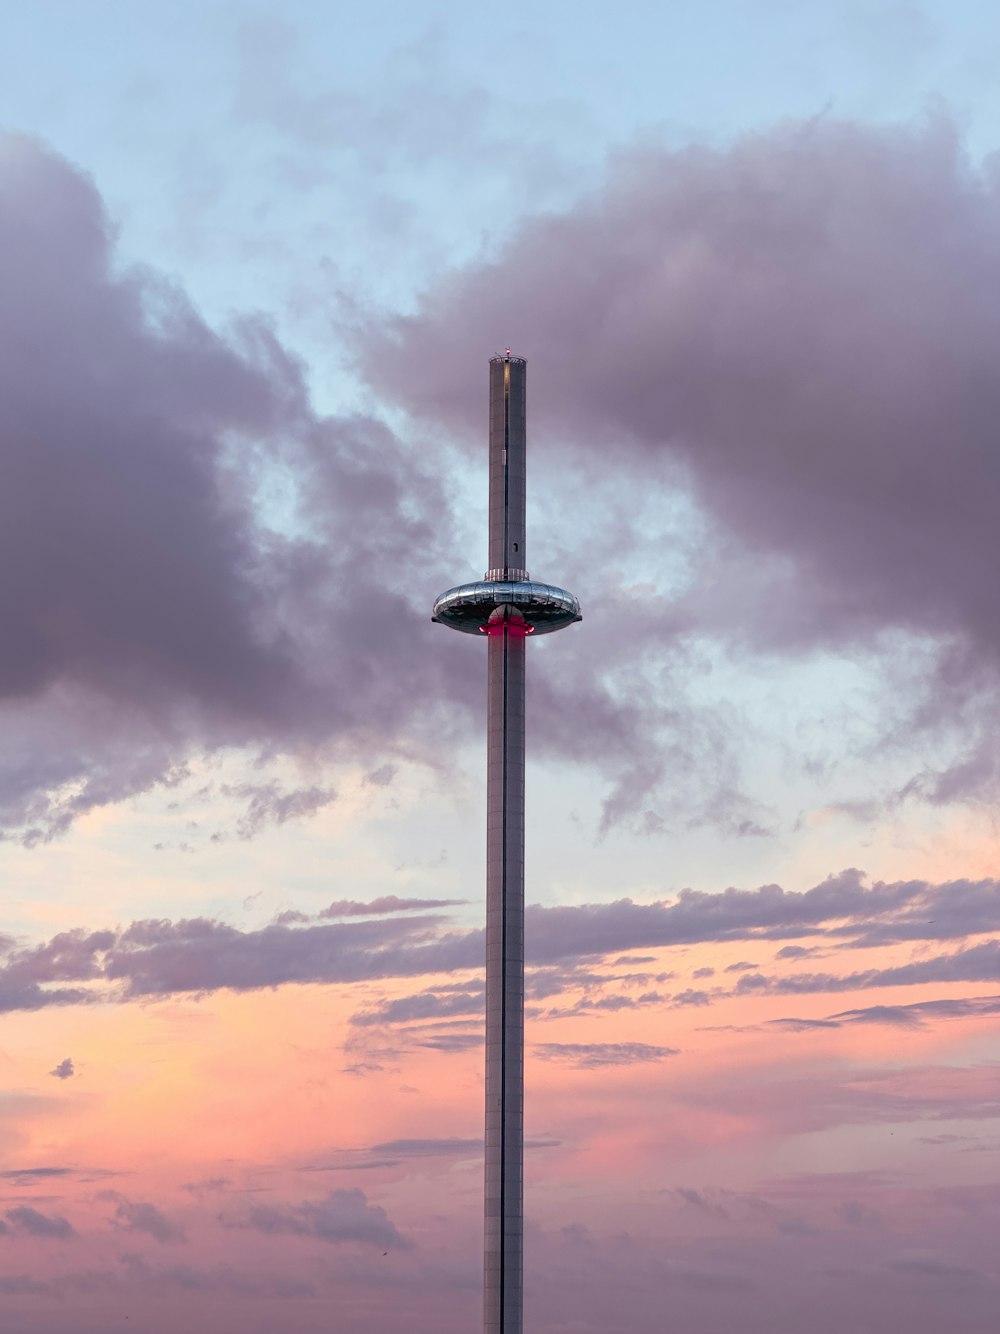 a tall pole with a light on top of it